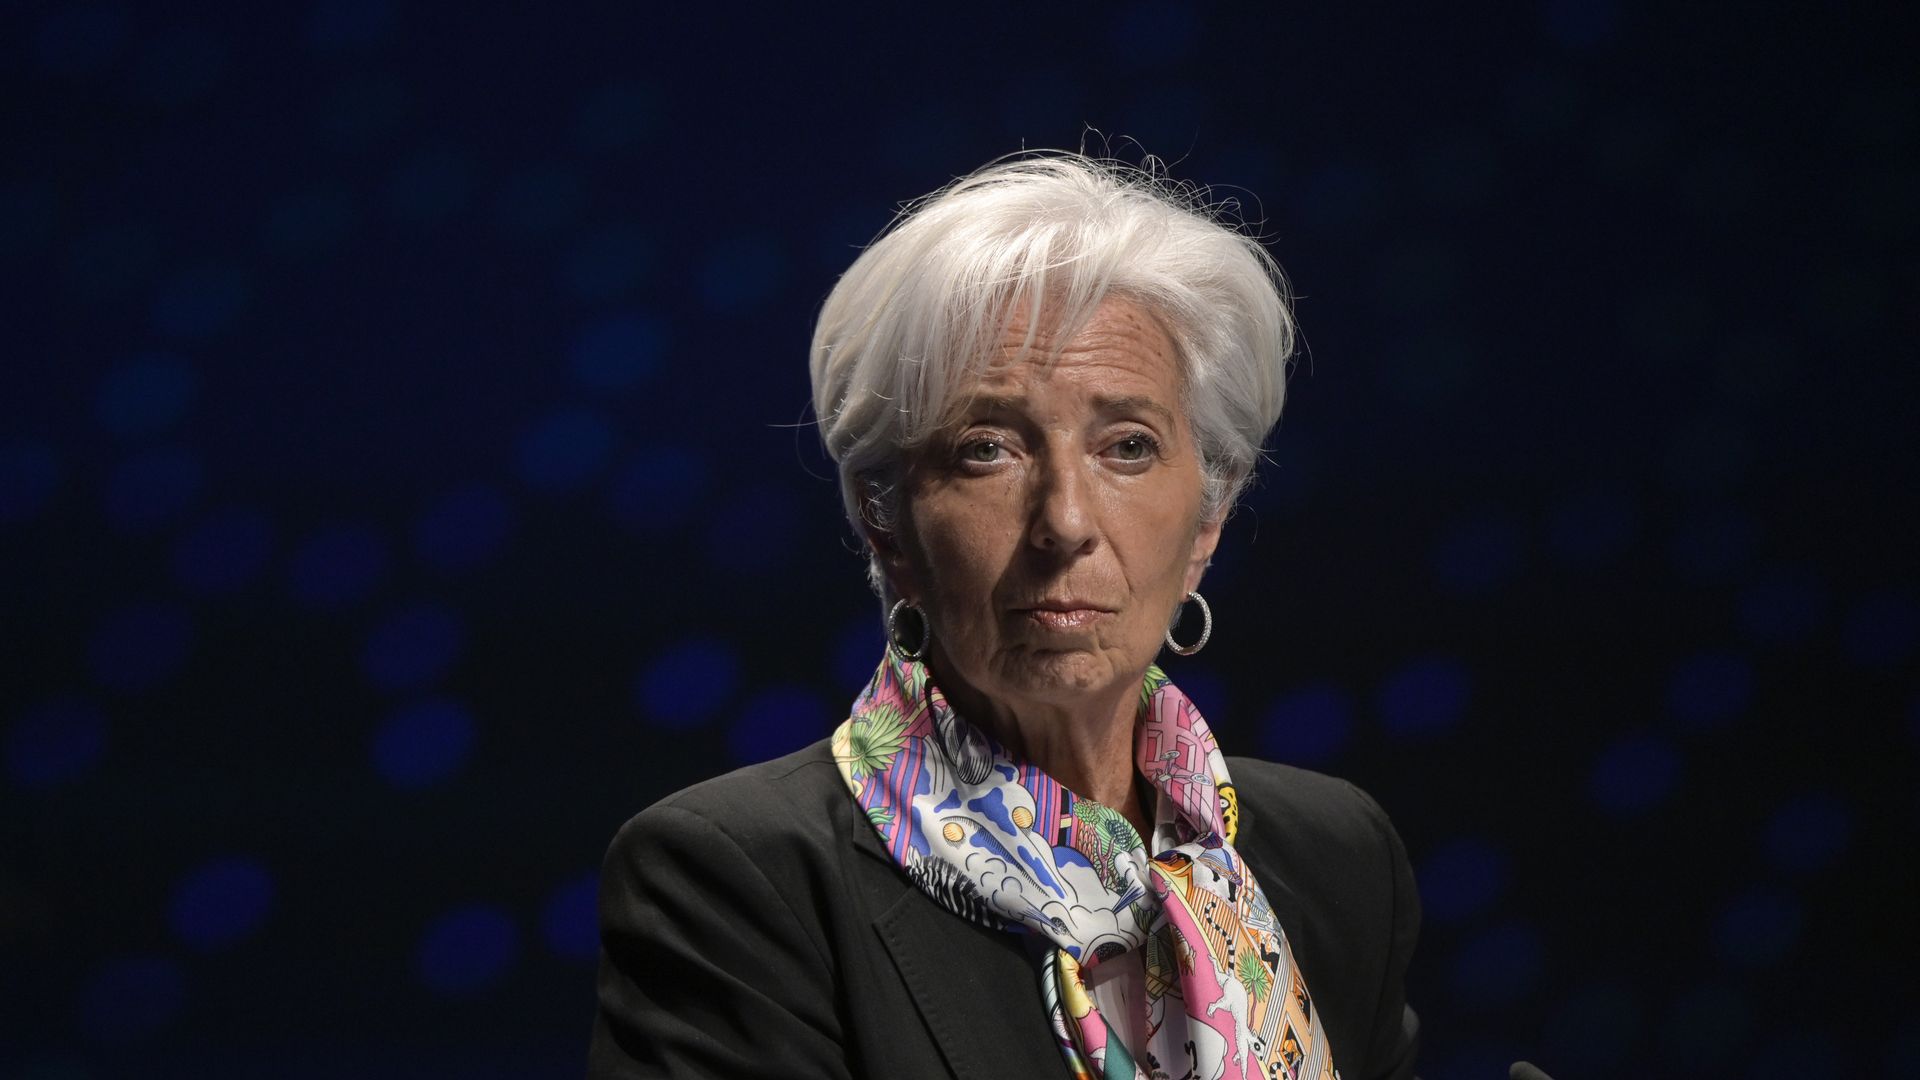 The President of the European Central Bank Christine Lagarde 